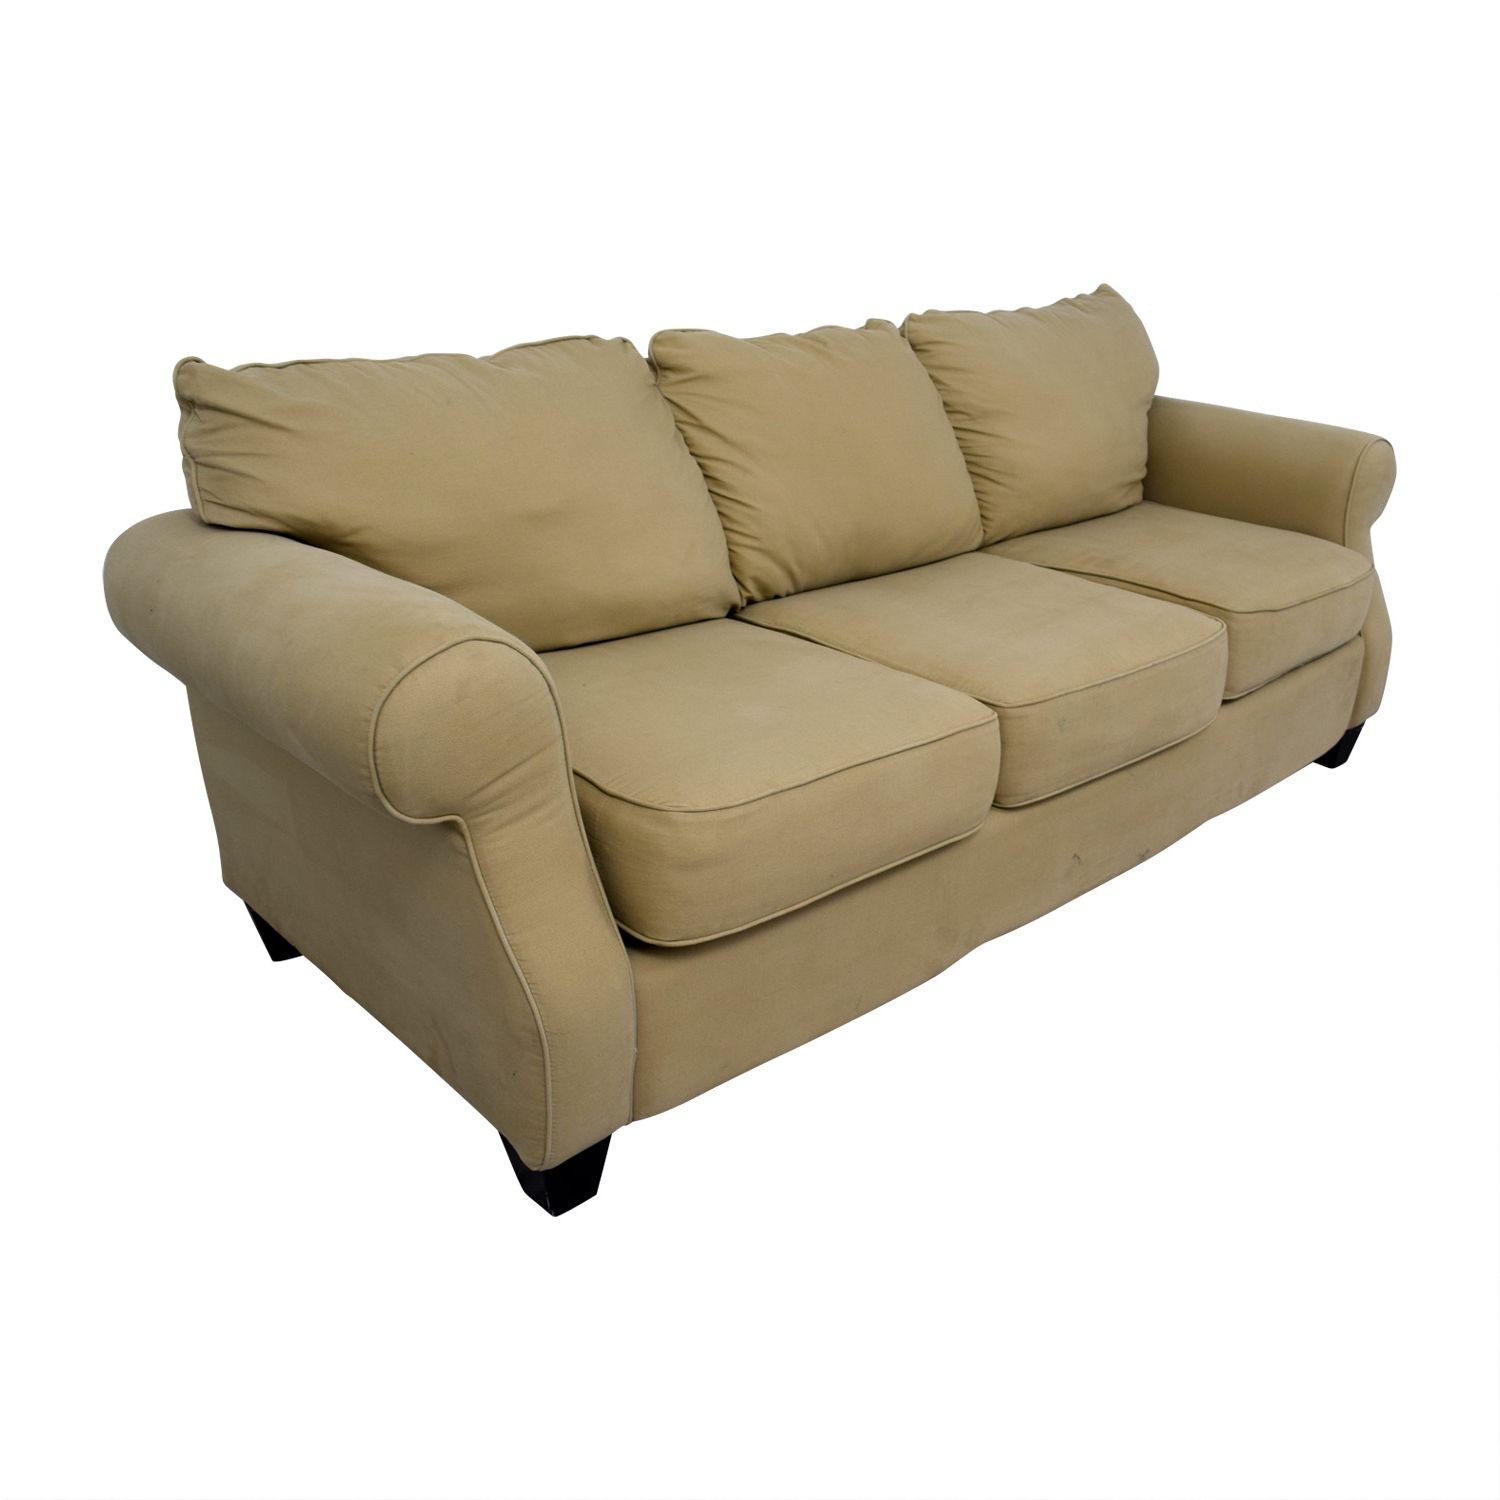 [%90% Off – Beige Three Cushion Curved Arm Sofa / Sofas In Most Popular Sofas With Curved Arms|sofas With Curved Arms Throughout Fashionable 90% Off – Beige Three Cushion Curved Arm Sofa / Sofas|favorite Sofas With Curved Arms Regarding 90% Off – Beige Three Cushion Curved Arm Sofa / Sofas|most Current 90% Off – Beige Three Cushion Curved Arm Sofa / Sofas For Sofas With Curved Arms%] (View 9 of 15)